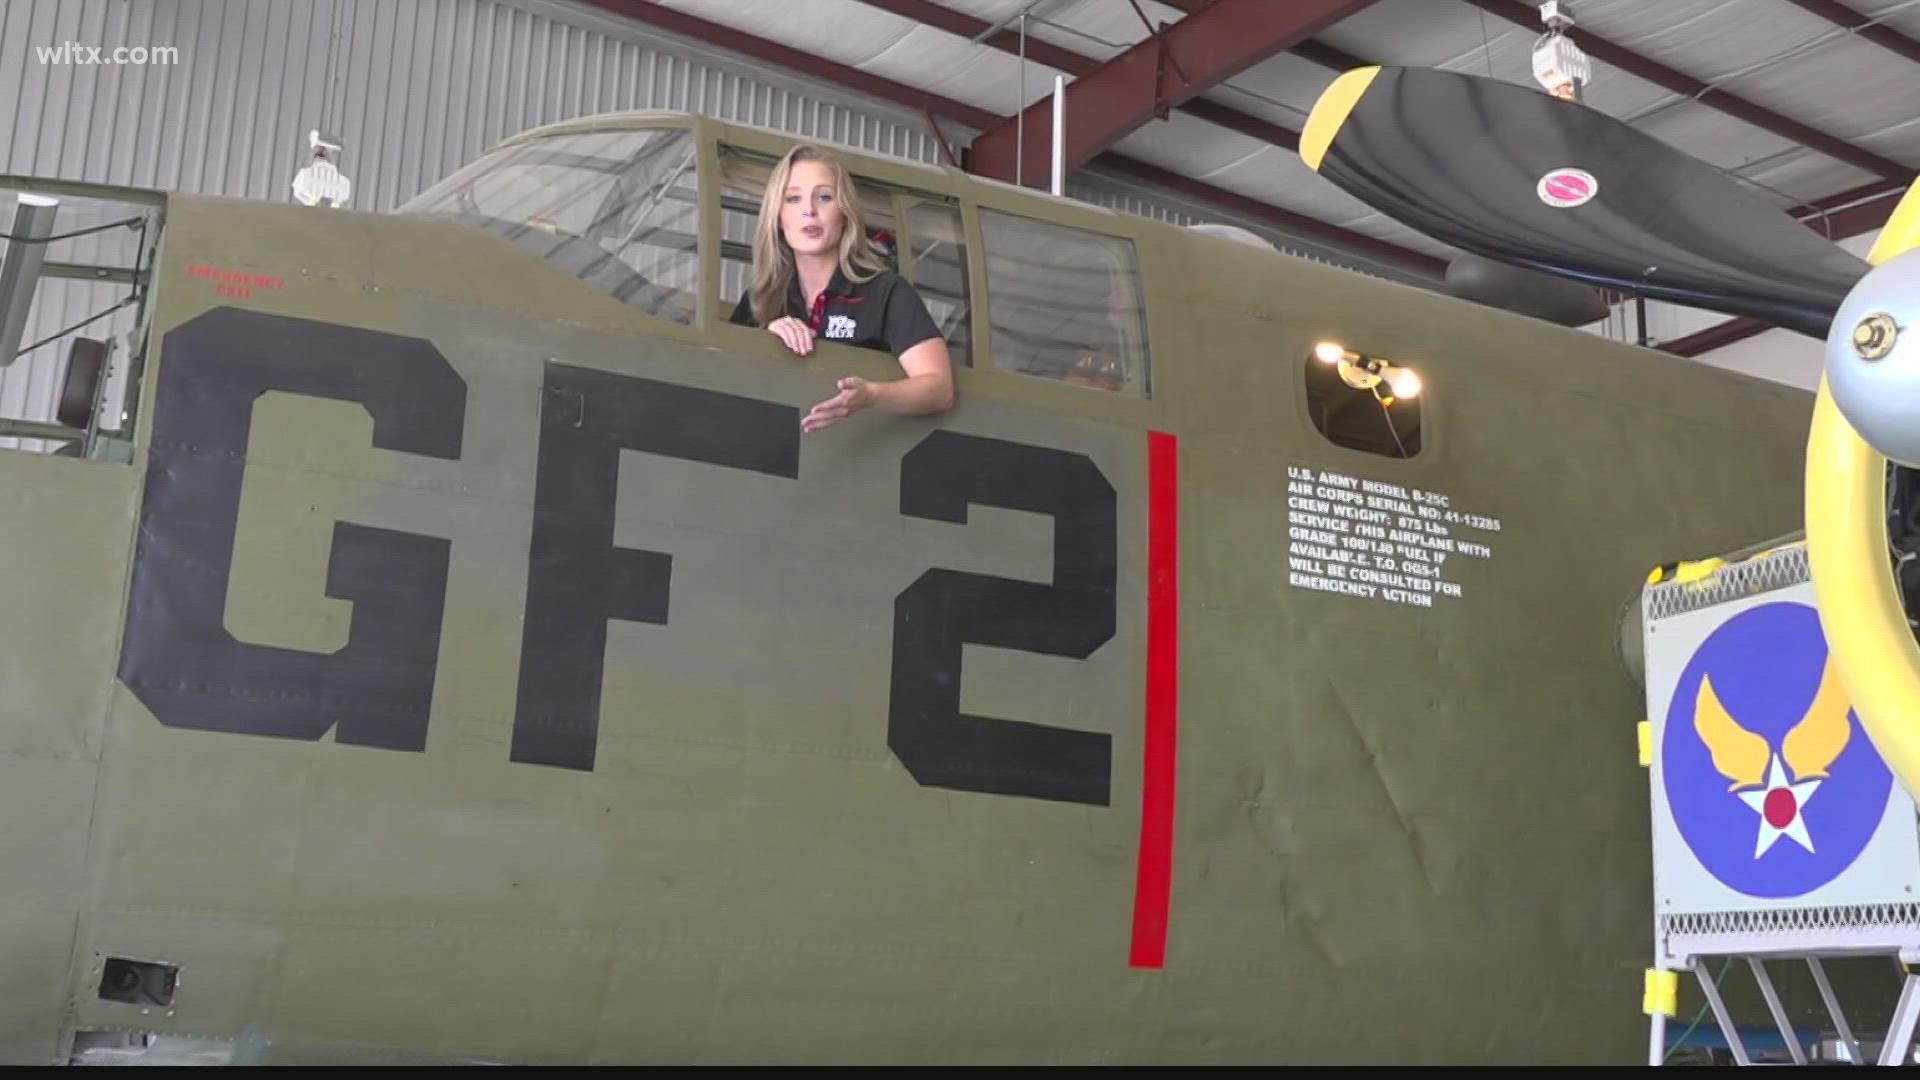 The SC Historic Aviation Foundation has been working on the B-25C bomber plane for over eight years.